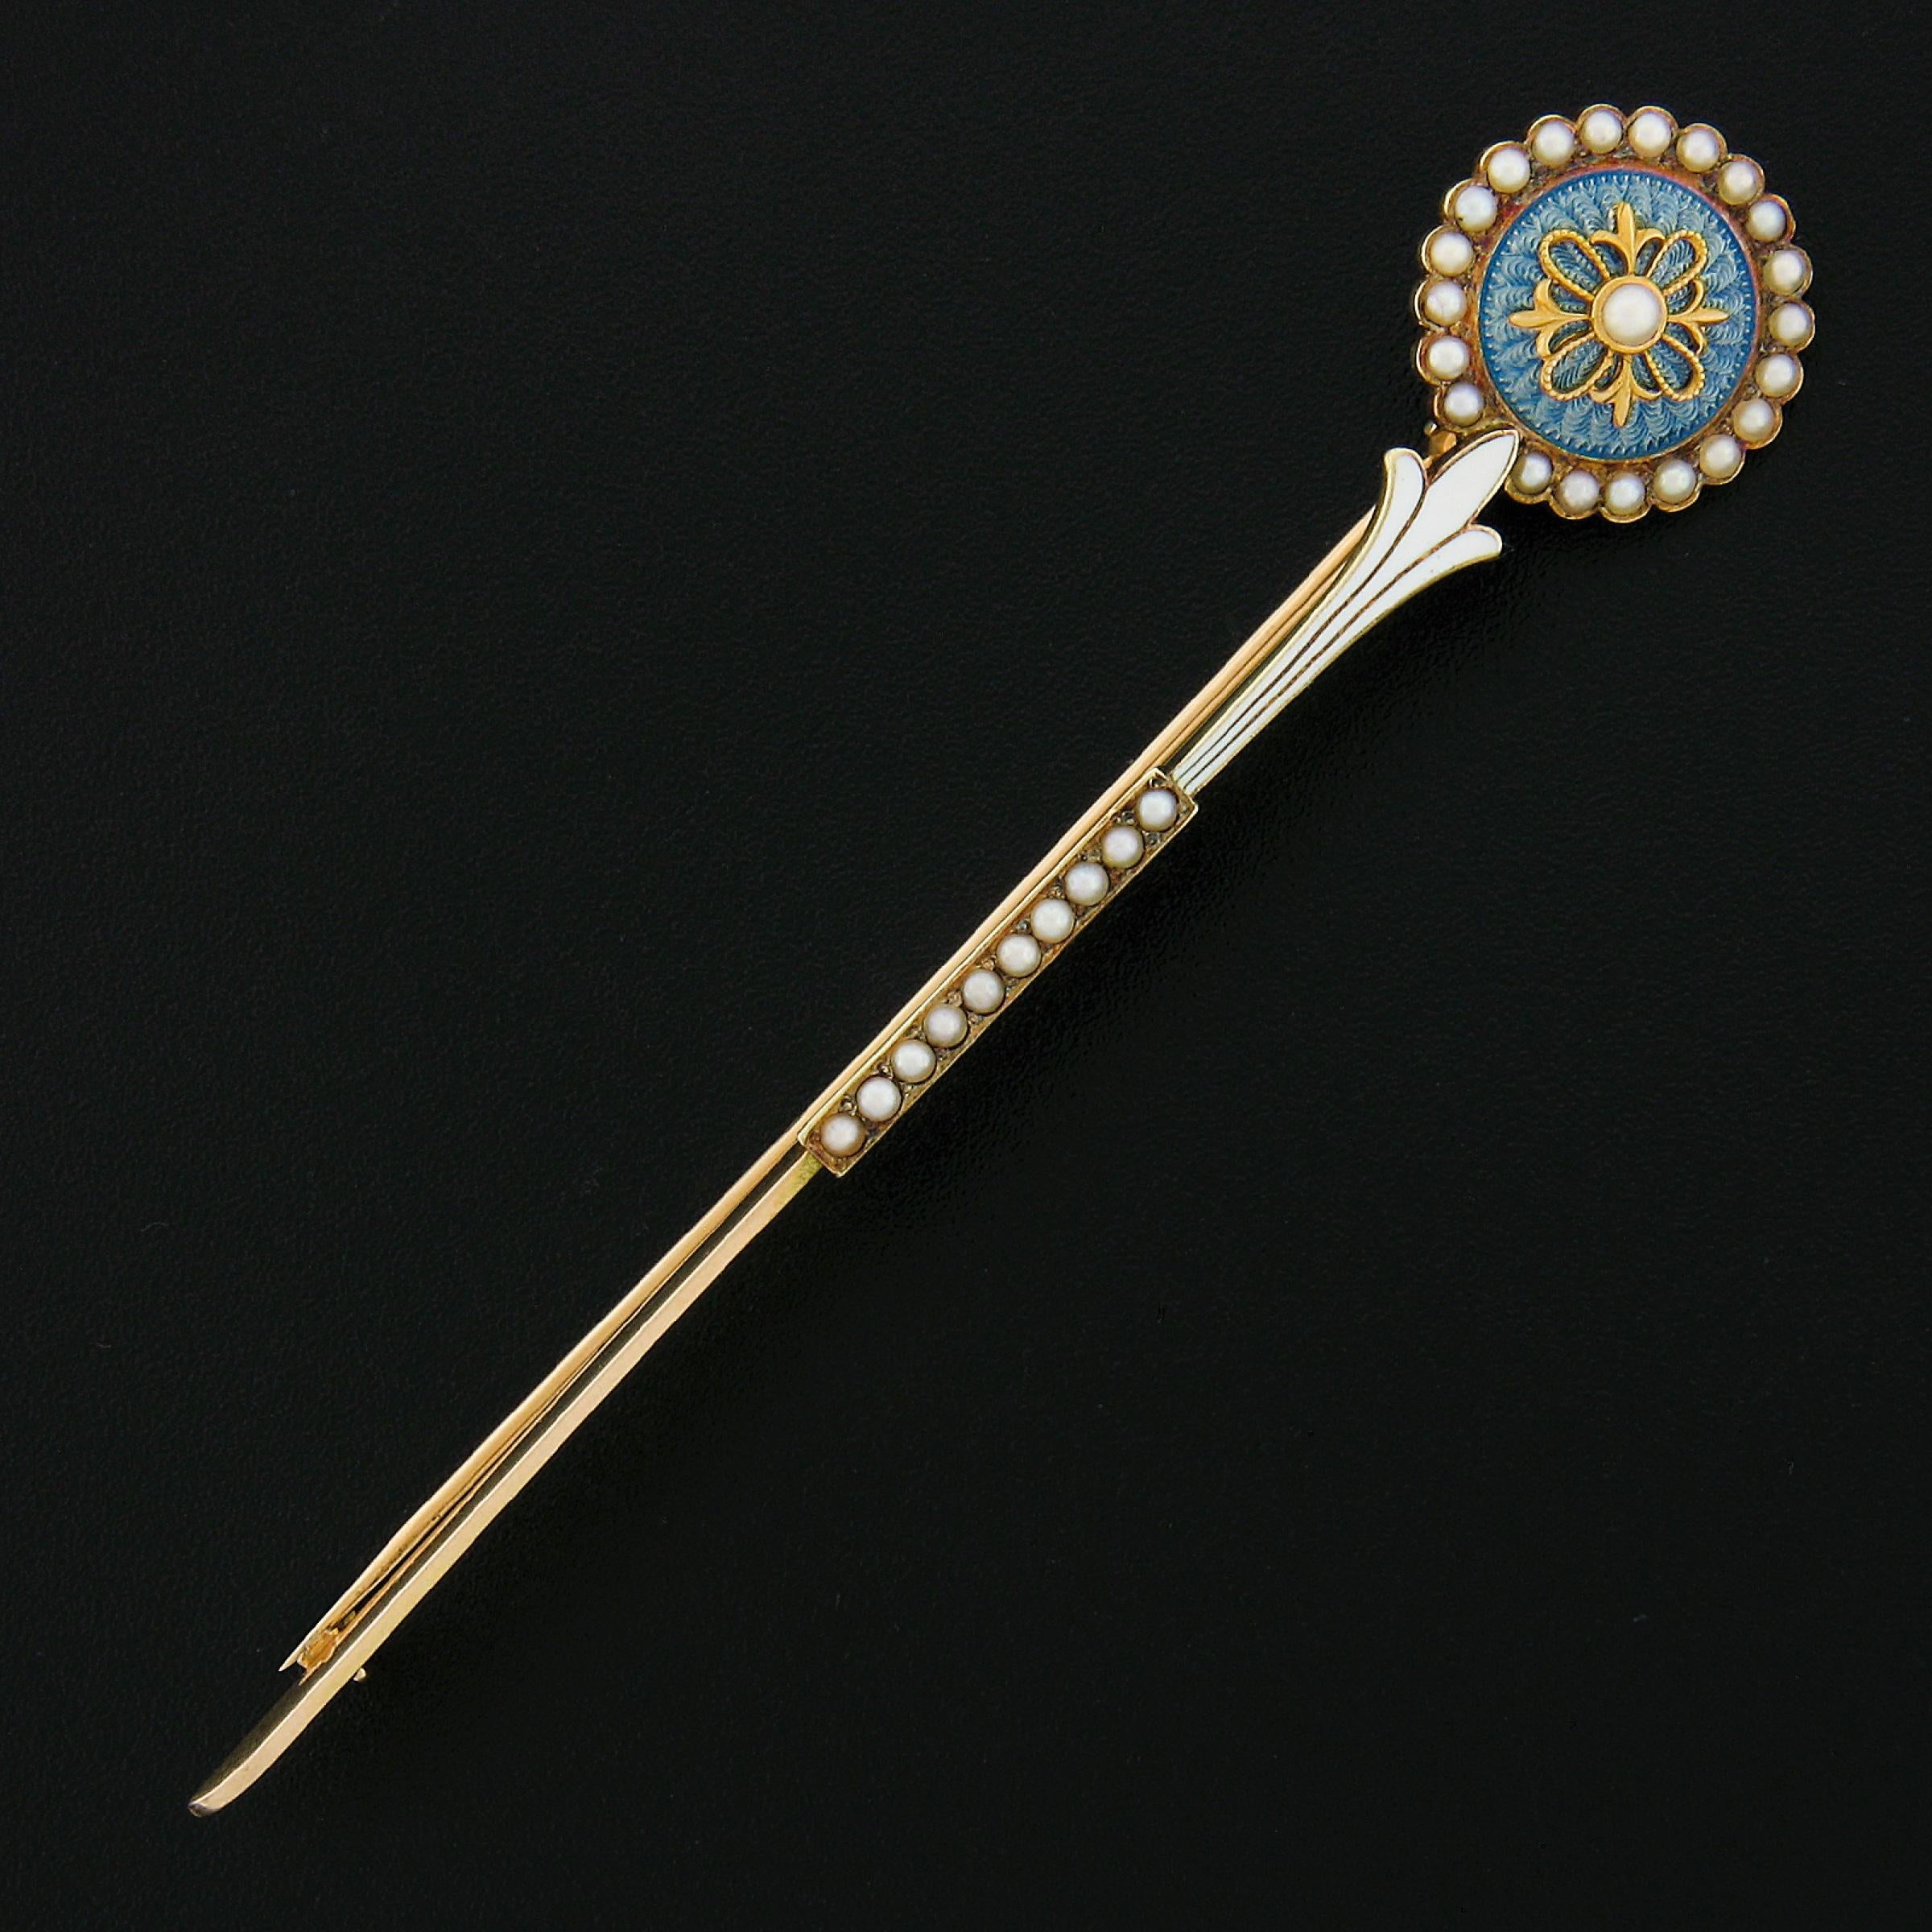 Here we have an exceptional art deco period brooch that was designed by Allsopp-Bliss Co. and crafted from solid 14k yellow gold. It features a beautiful flower design set with lovely seed pearls throughout and further adorned with white and blue